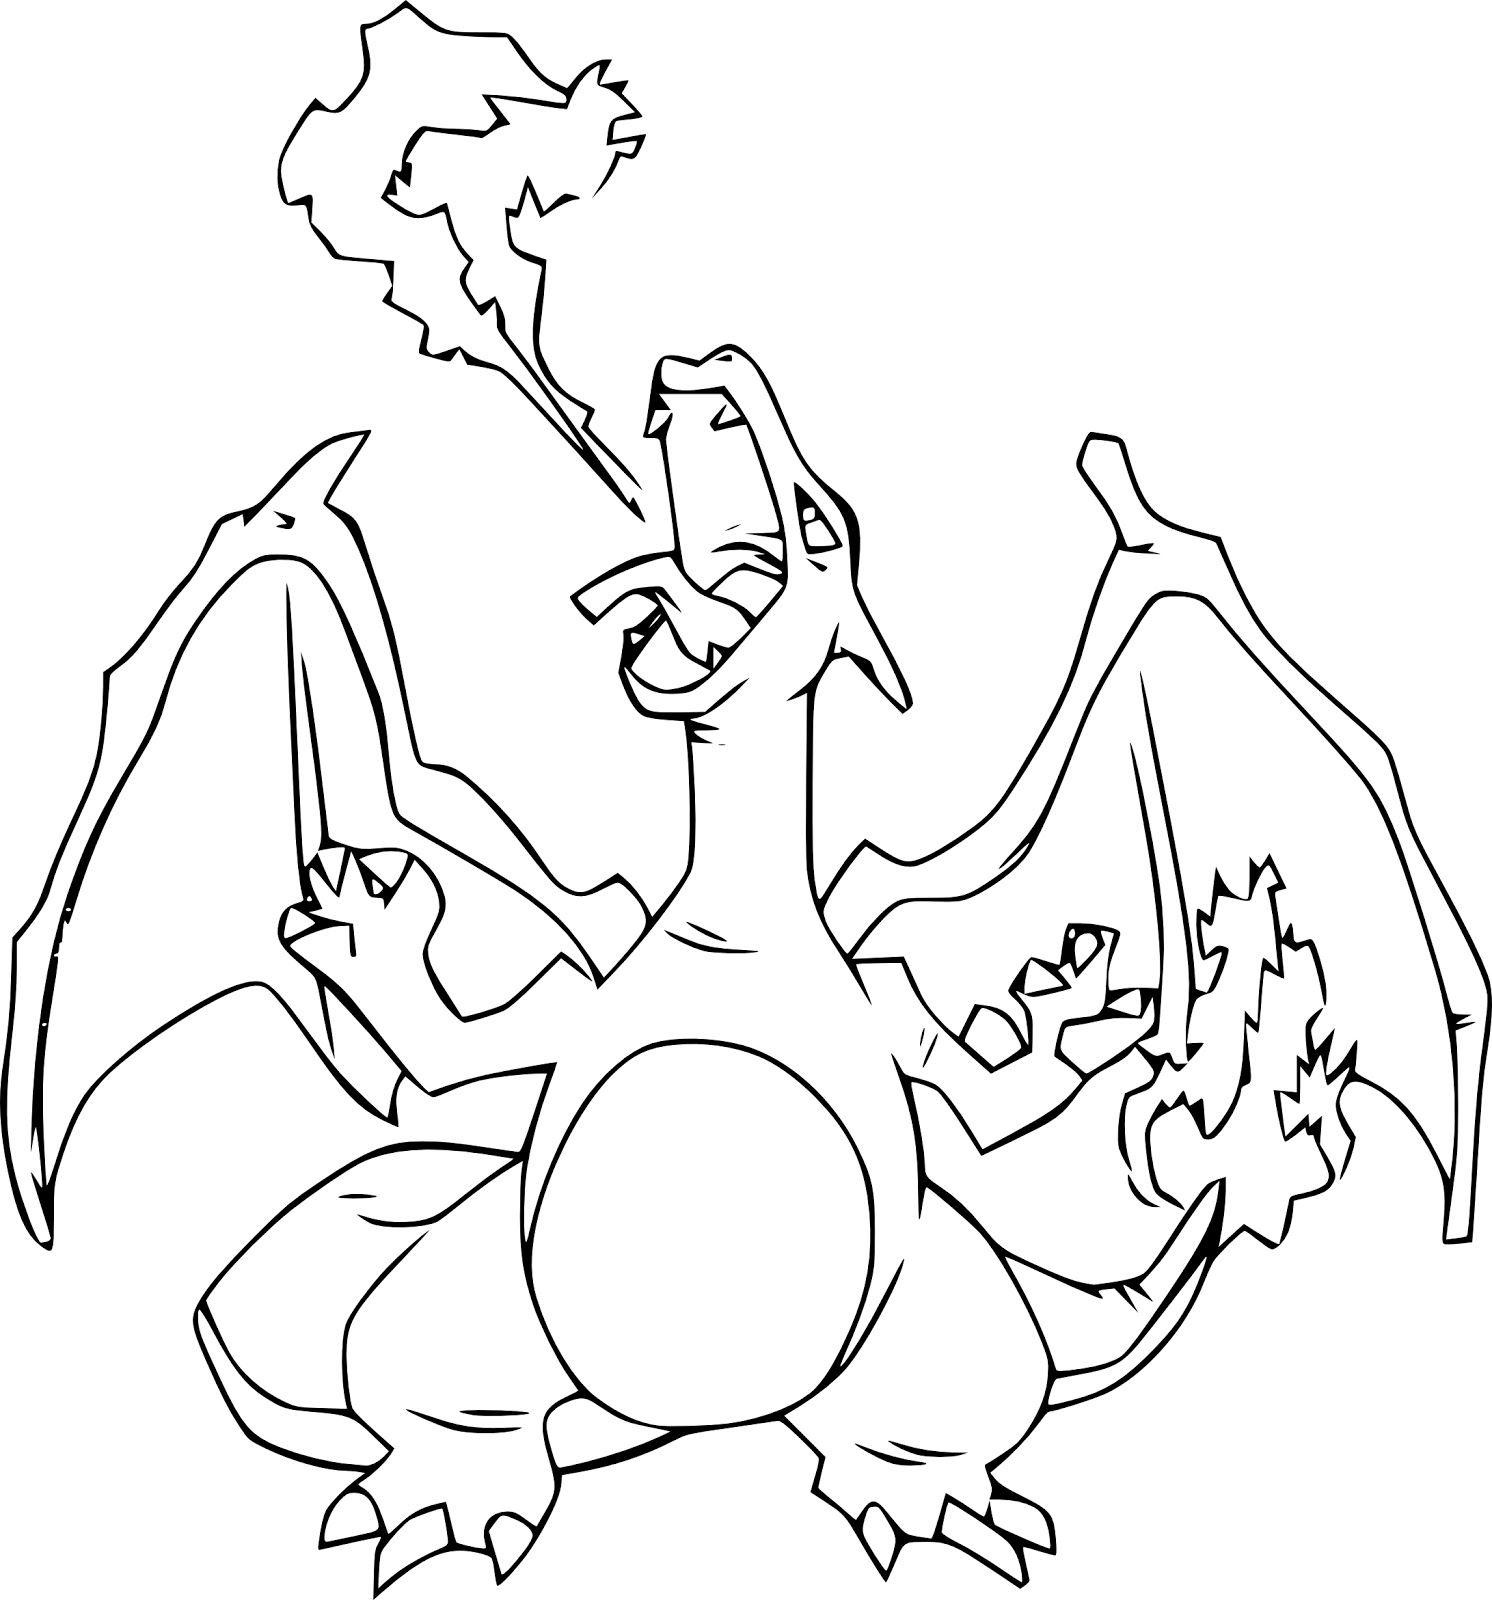 Printable Charizard Coloring Pages For Free - Free Pokemon Coloring Pages intérieur Dessin Pokemon Facile Dracaufeu